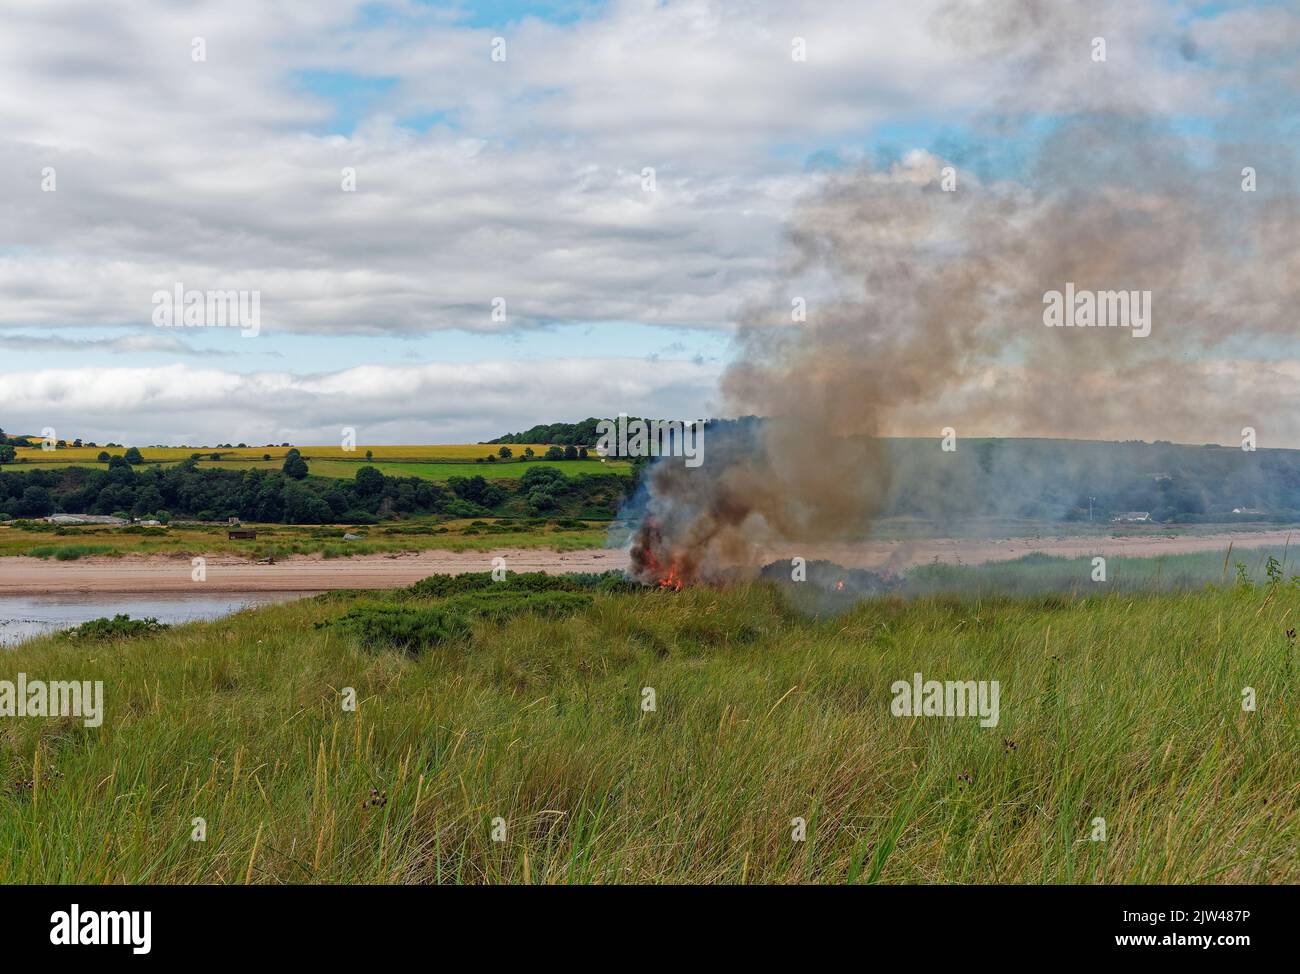 Flames and smoke from a Wildfire in the Gorse and Grasses behind the Dunes of Montrose Beach, with the River North Esk in the background. Stock Photo